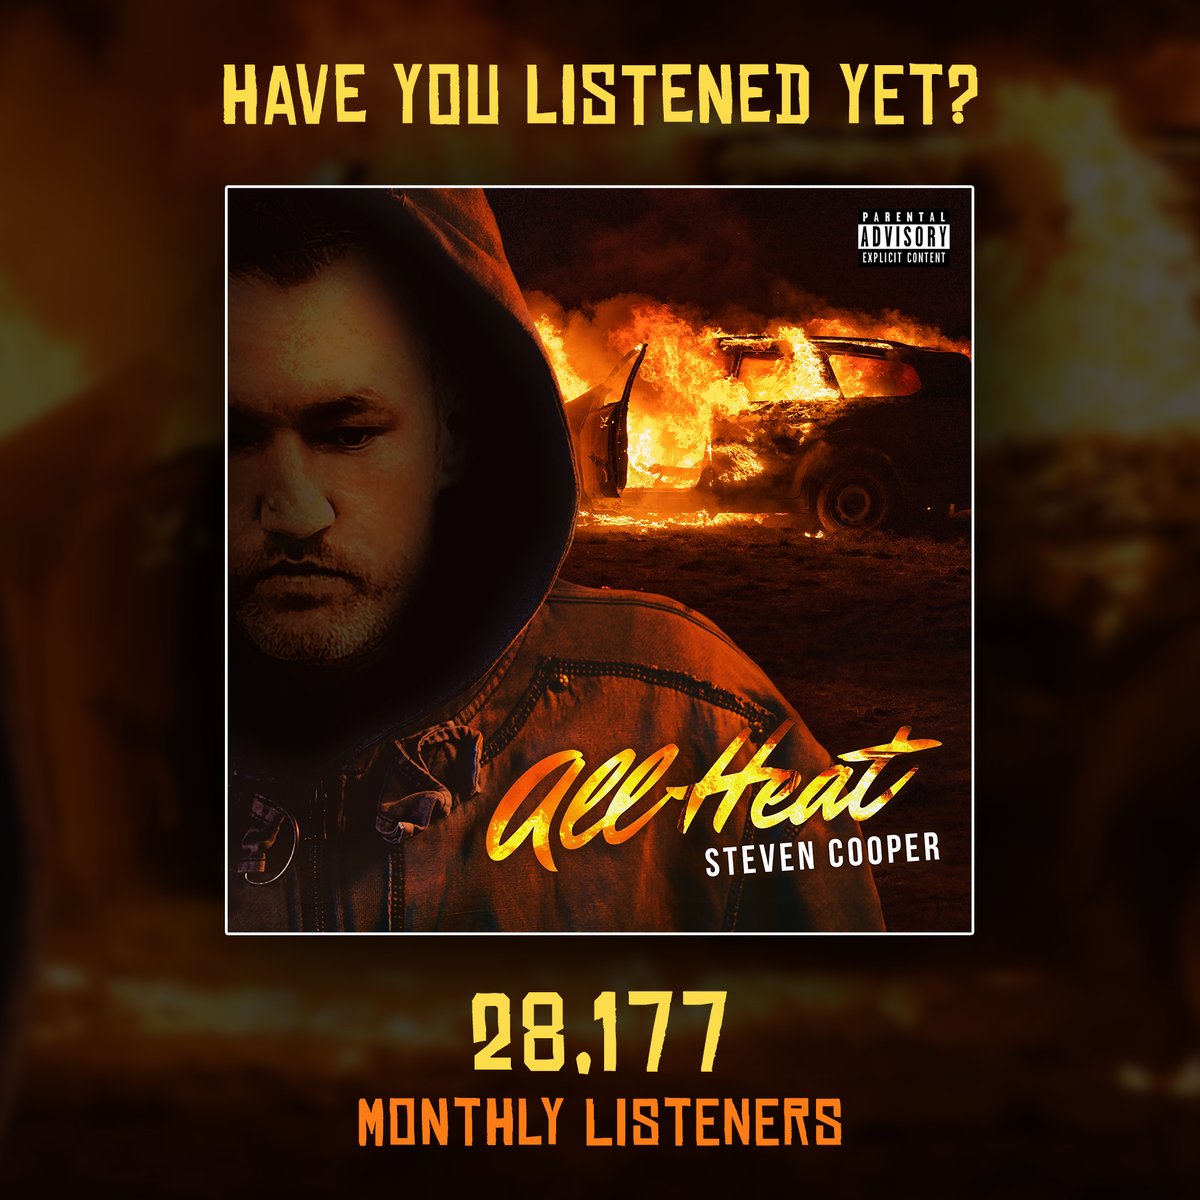 28,177 listeners on the new album 'All Heat' in it's first month!!! That's a record for me. 🥂 Get it above 30,000 and I'll announce a surprise.